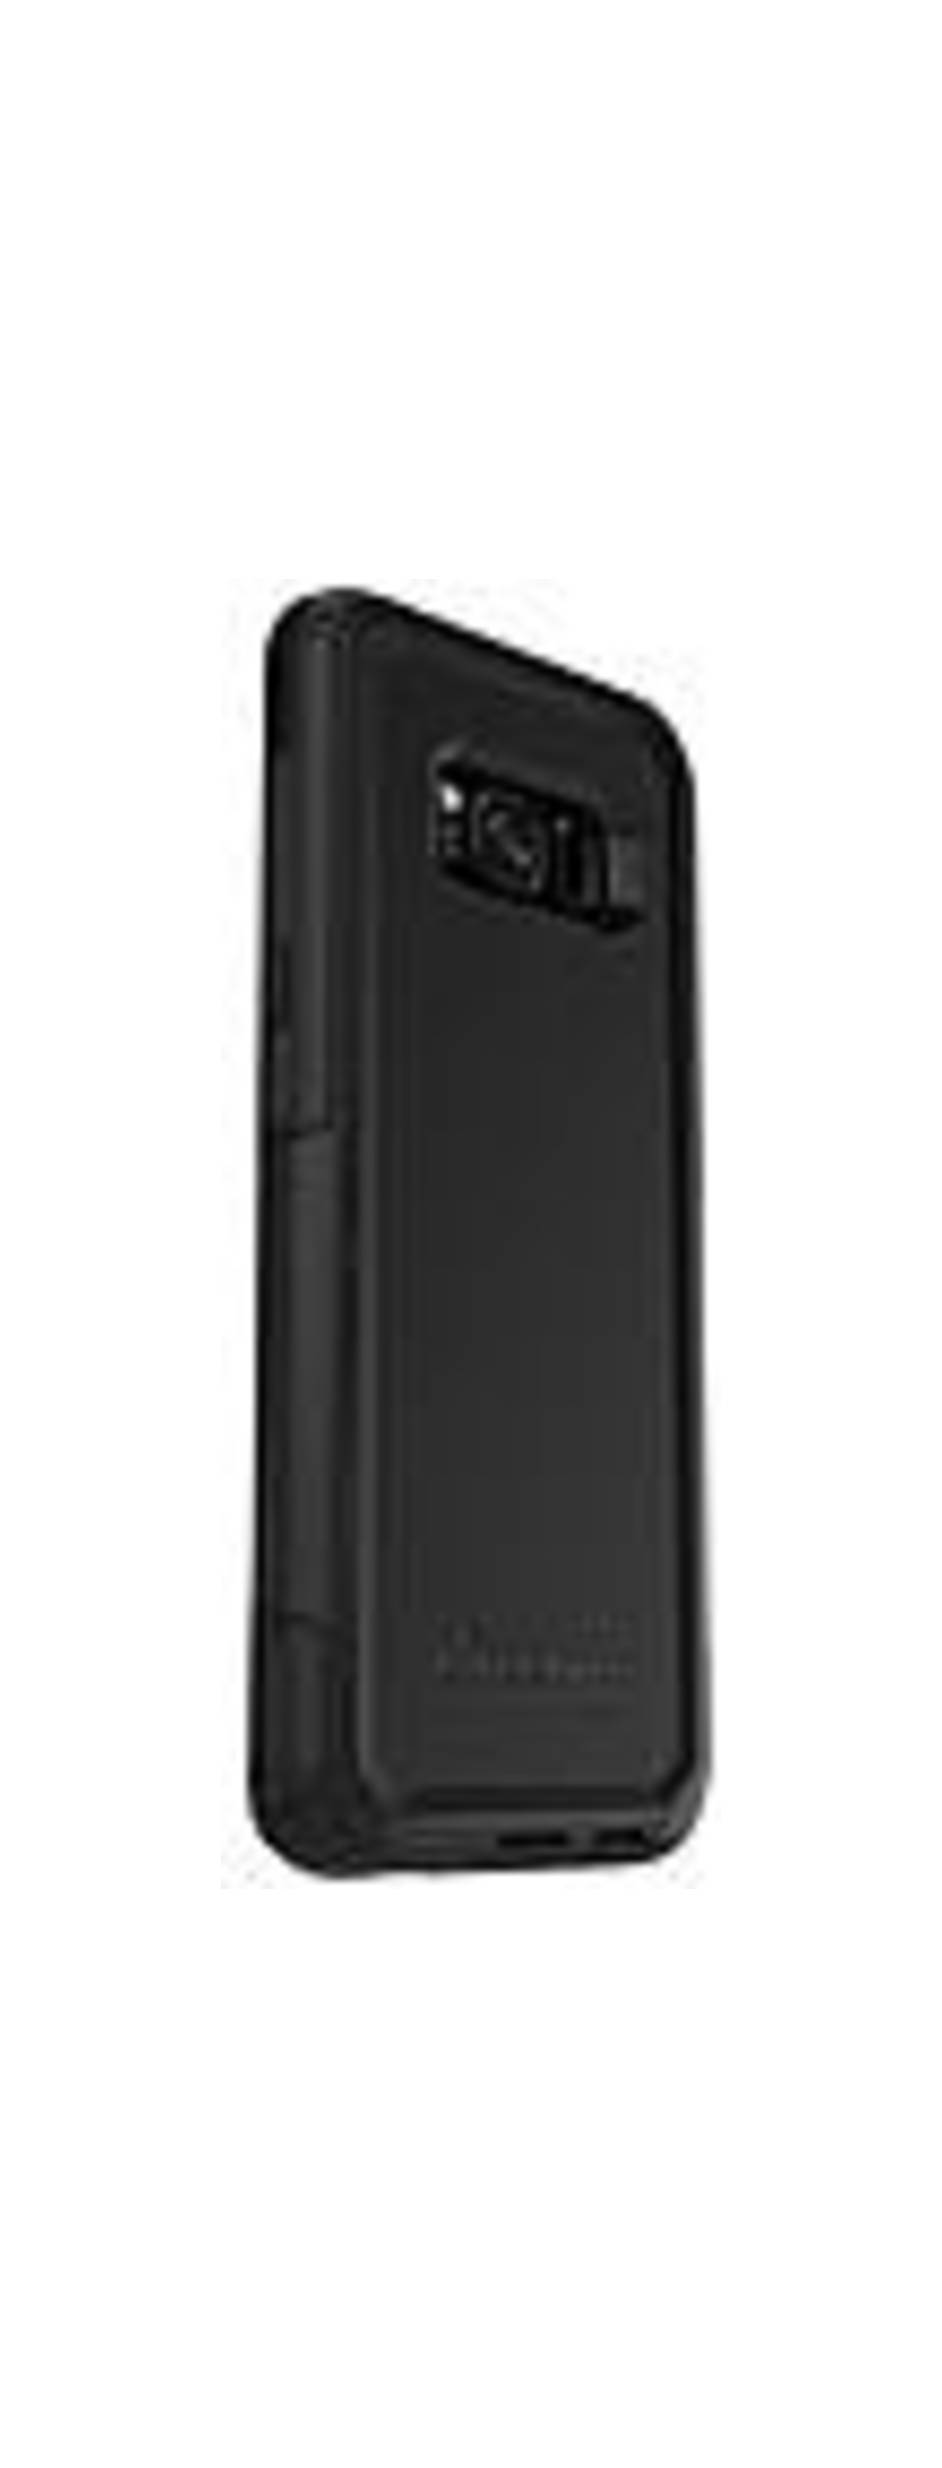 OtterBox Galaxy S8+ Commuter Series Case - For Smartphone - Black - Impact Absorbing, Dust Resistant, Dirt Resistant, Drop Resistant, Bump Resistant,